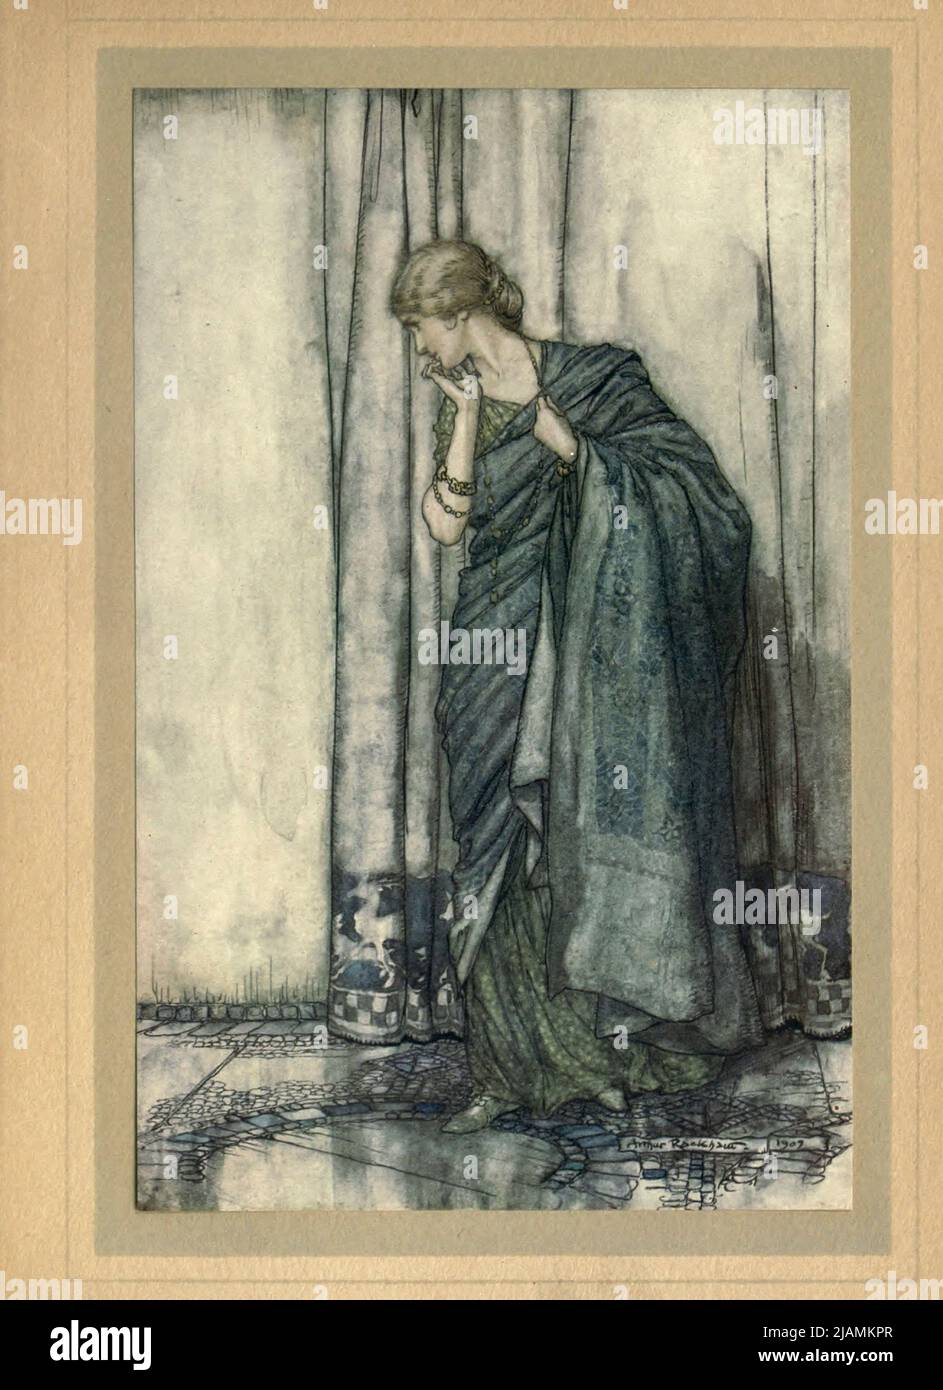 Helena from ' A midsummer night's dream ' by William Shakespeare, 1564-1616; Illustrated by Arthur Rackham, 1867-1939 Publication date 1908 Publisher London, Heinemann; New York, Doubleday, Page & Co Stock Photo